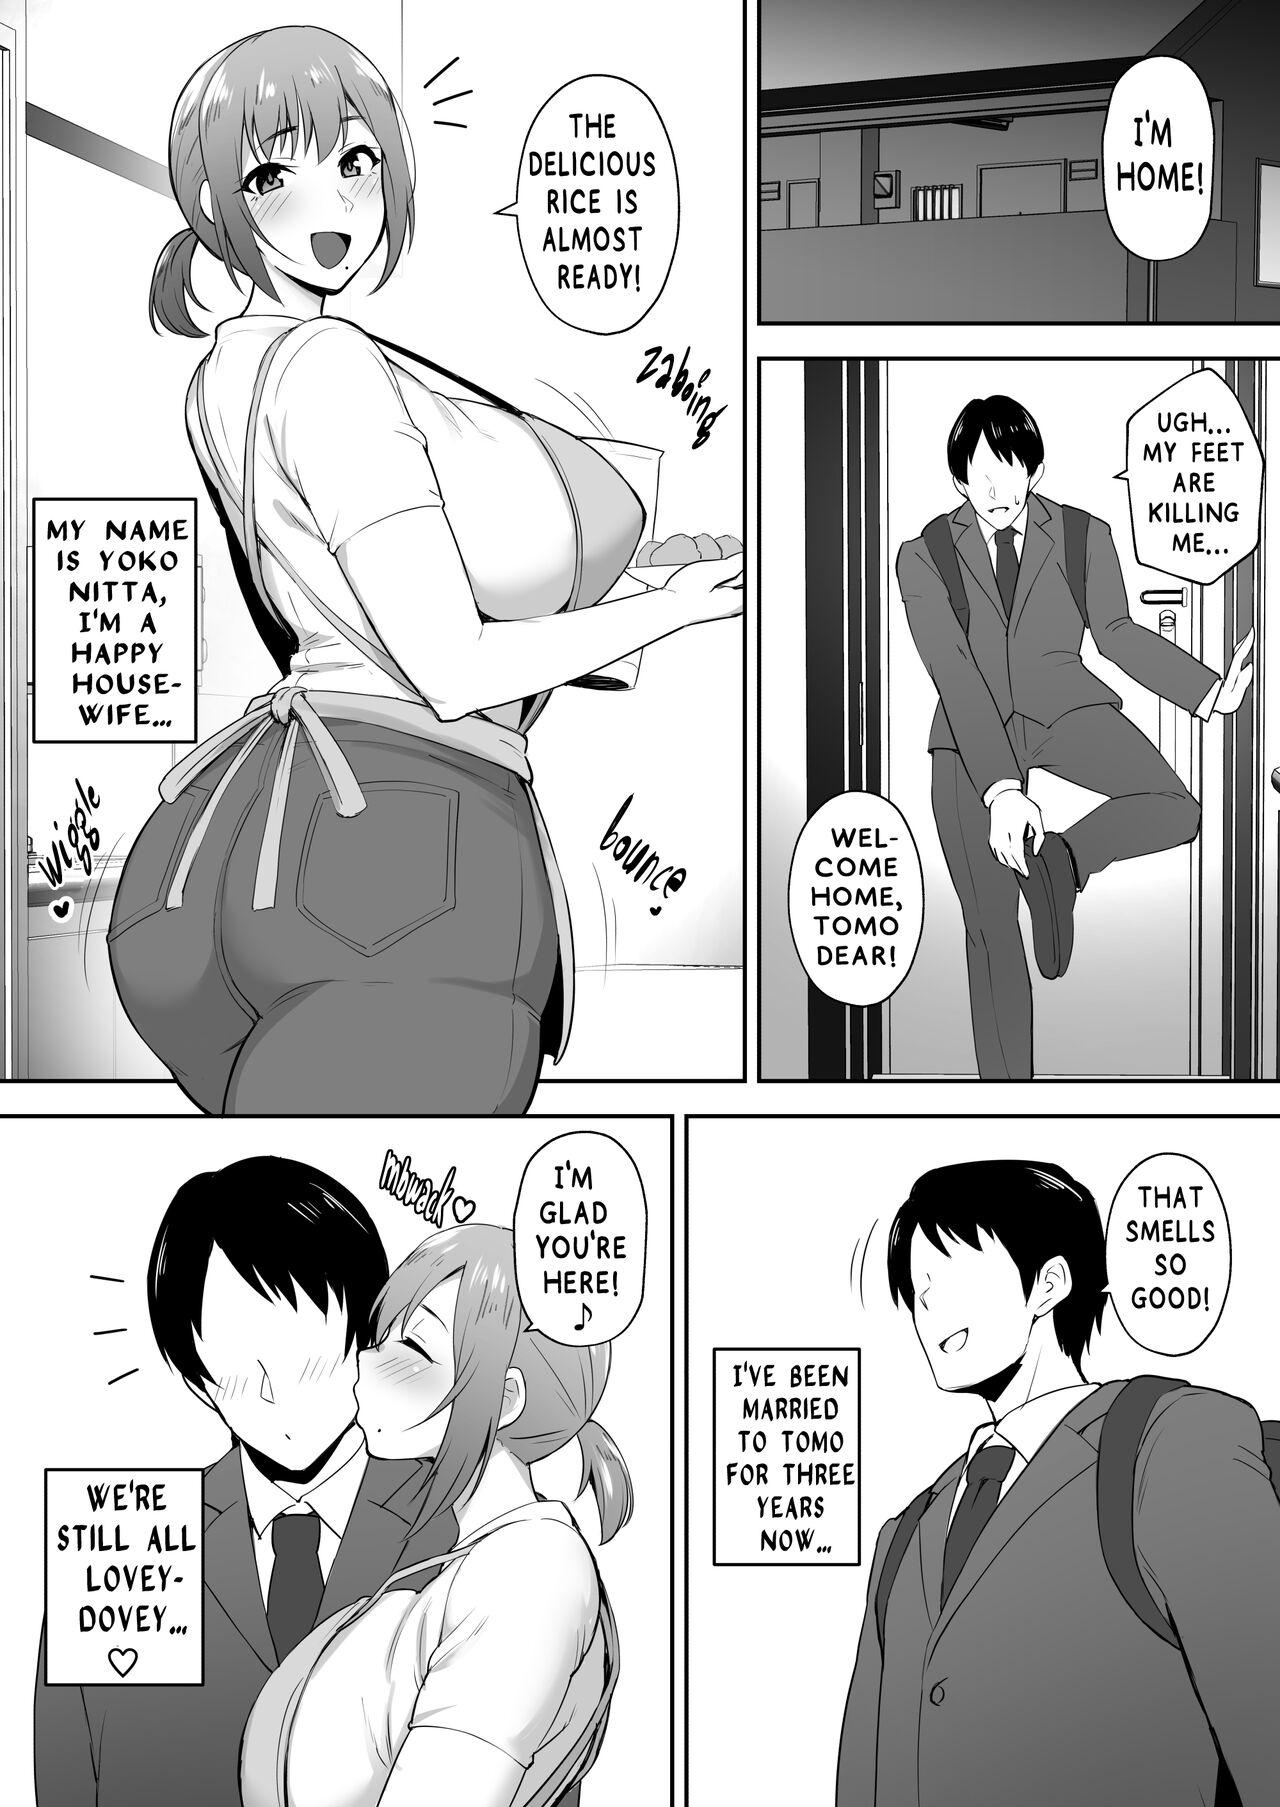 Hardcore Big Breasted Married Woman - Original Room - Page 1